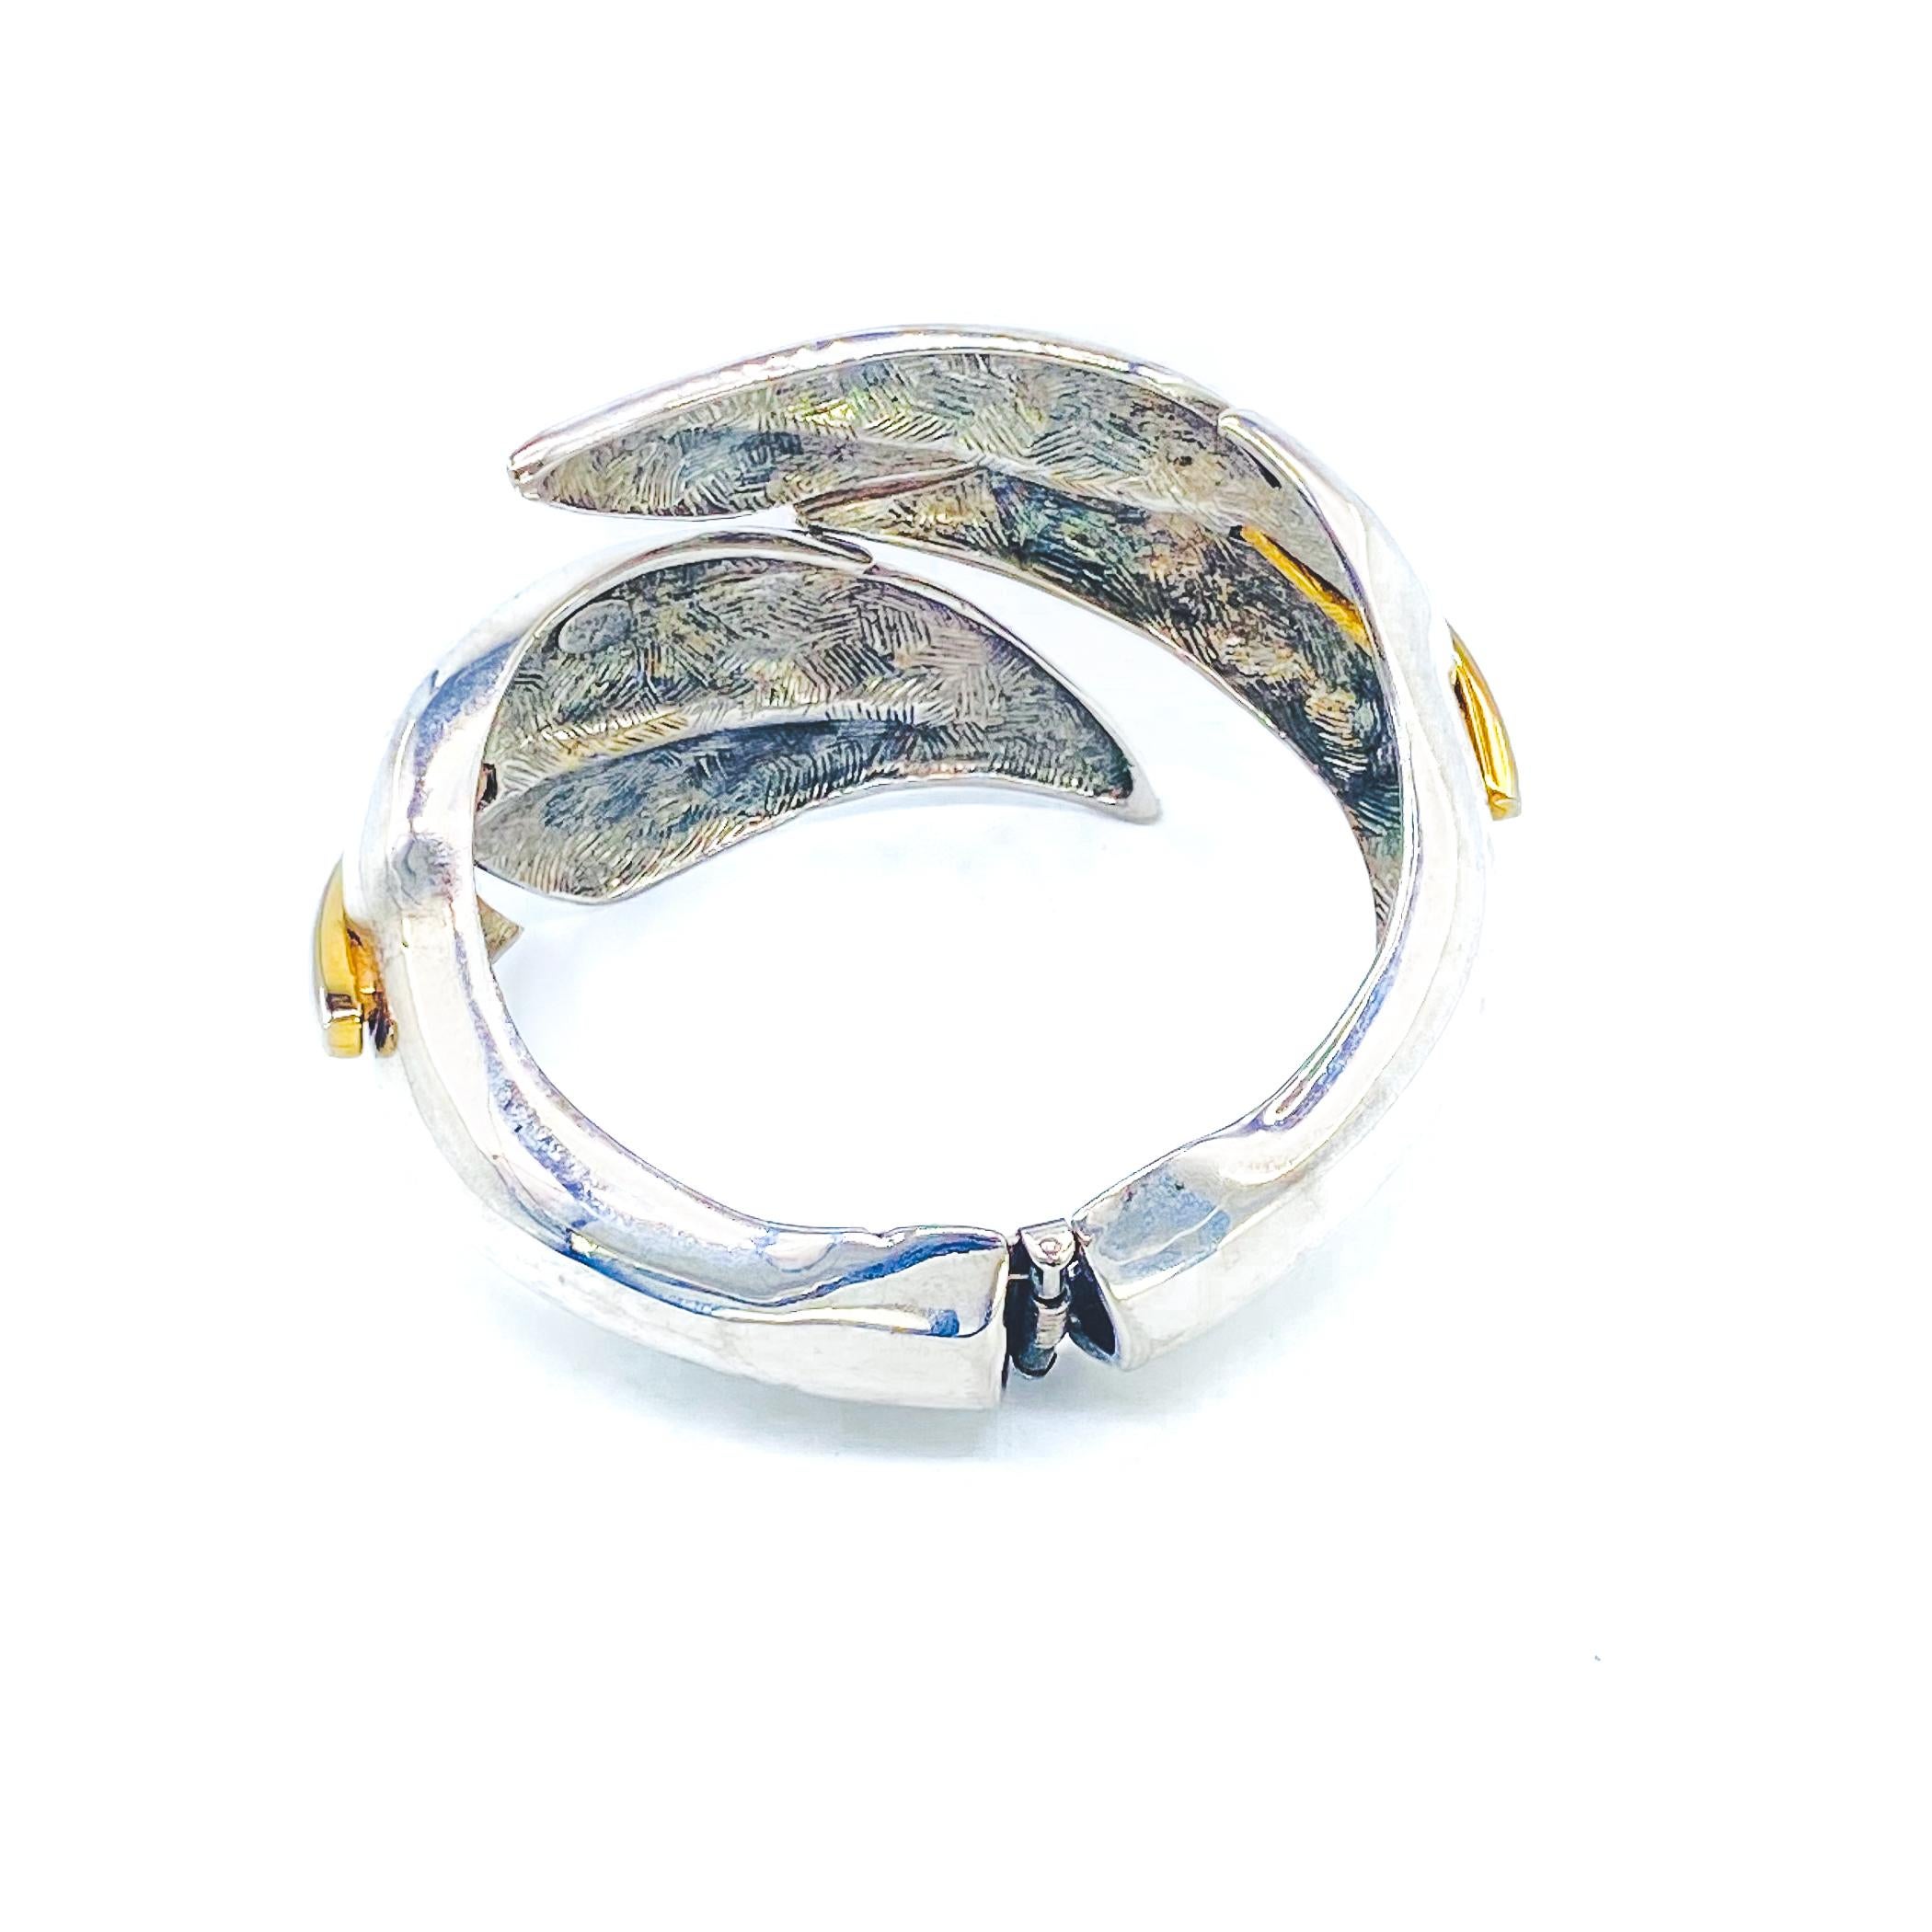 Givenchy Vintage 1980s Bracelet

Timelessly elegant statement cuff from the Givenchy 80s archive

Detail
-Cast from high quality silver and gold plated metal
-Made in France in the 1980s
-Beautiful leaf design hugs the wrist perfectly

Size &